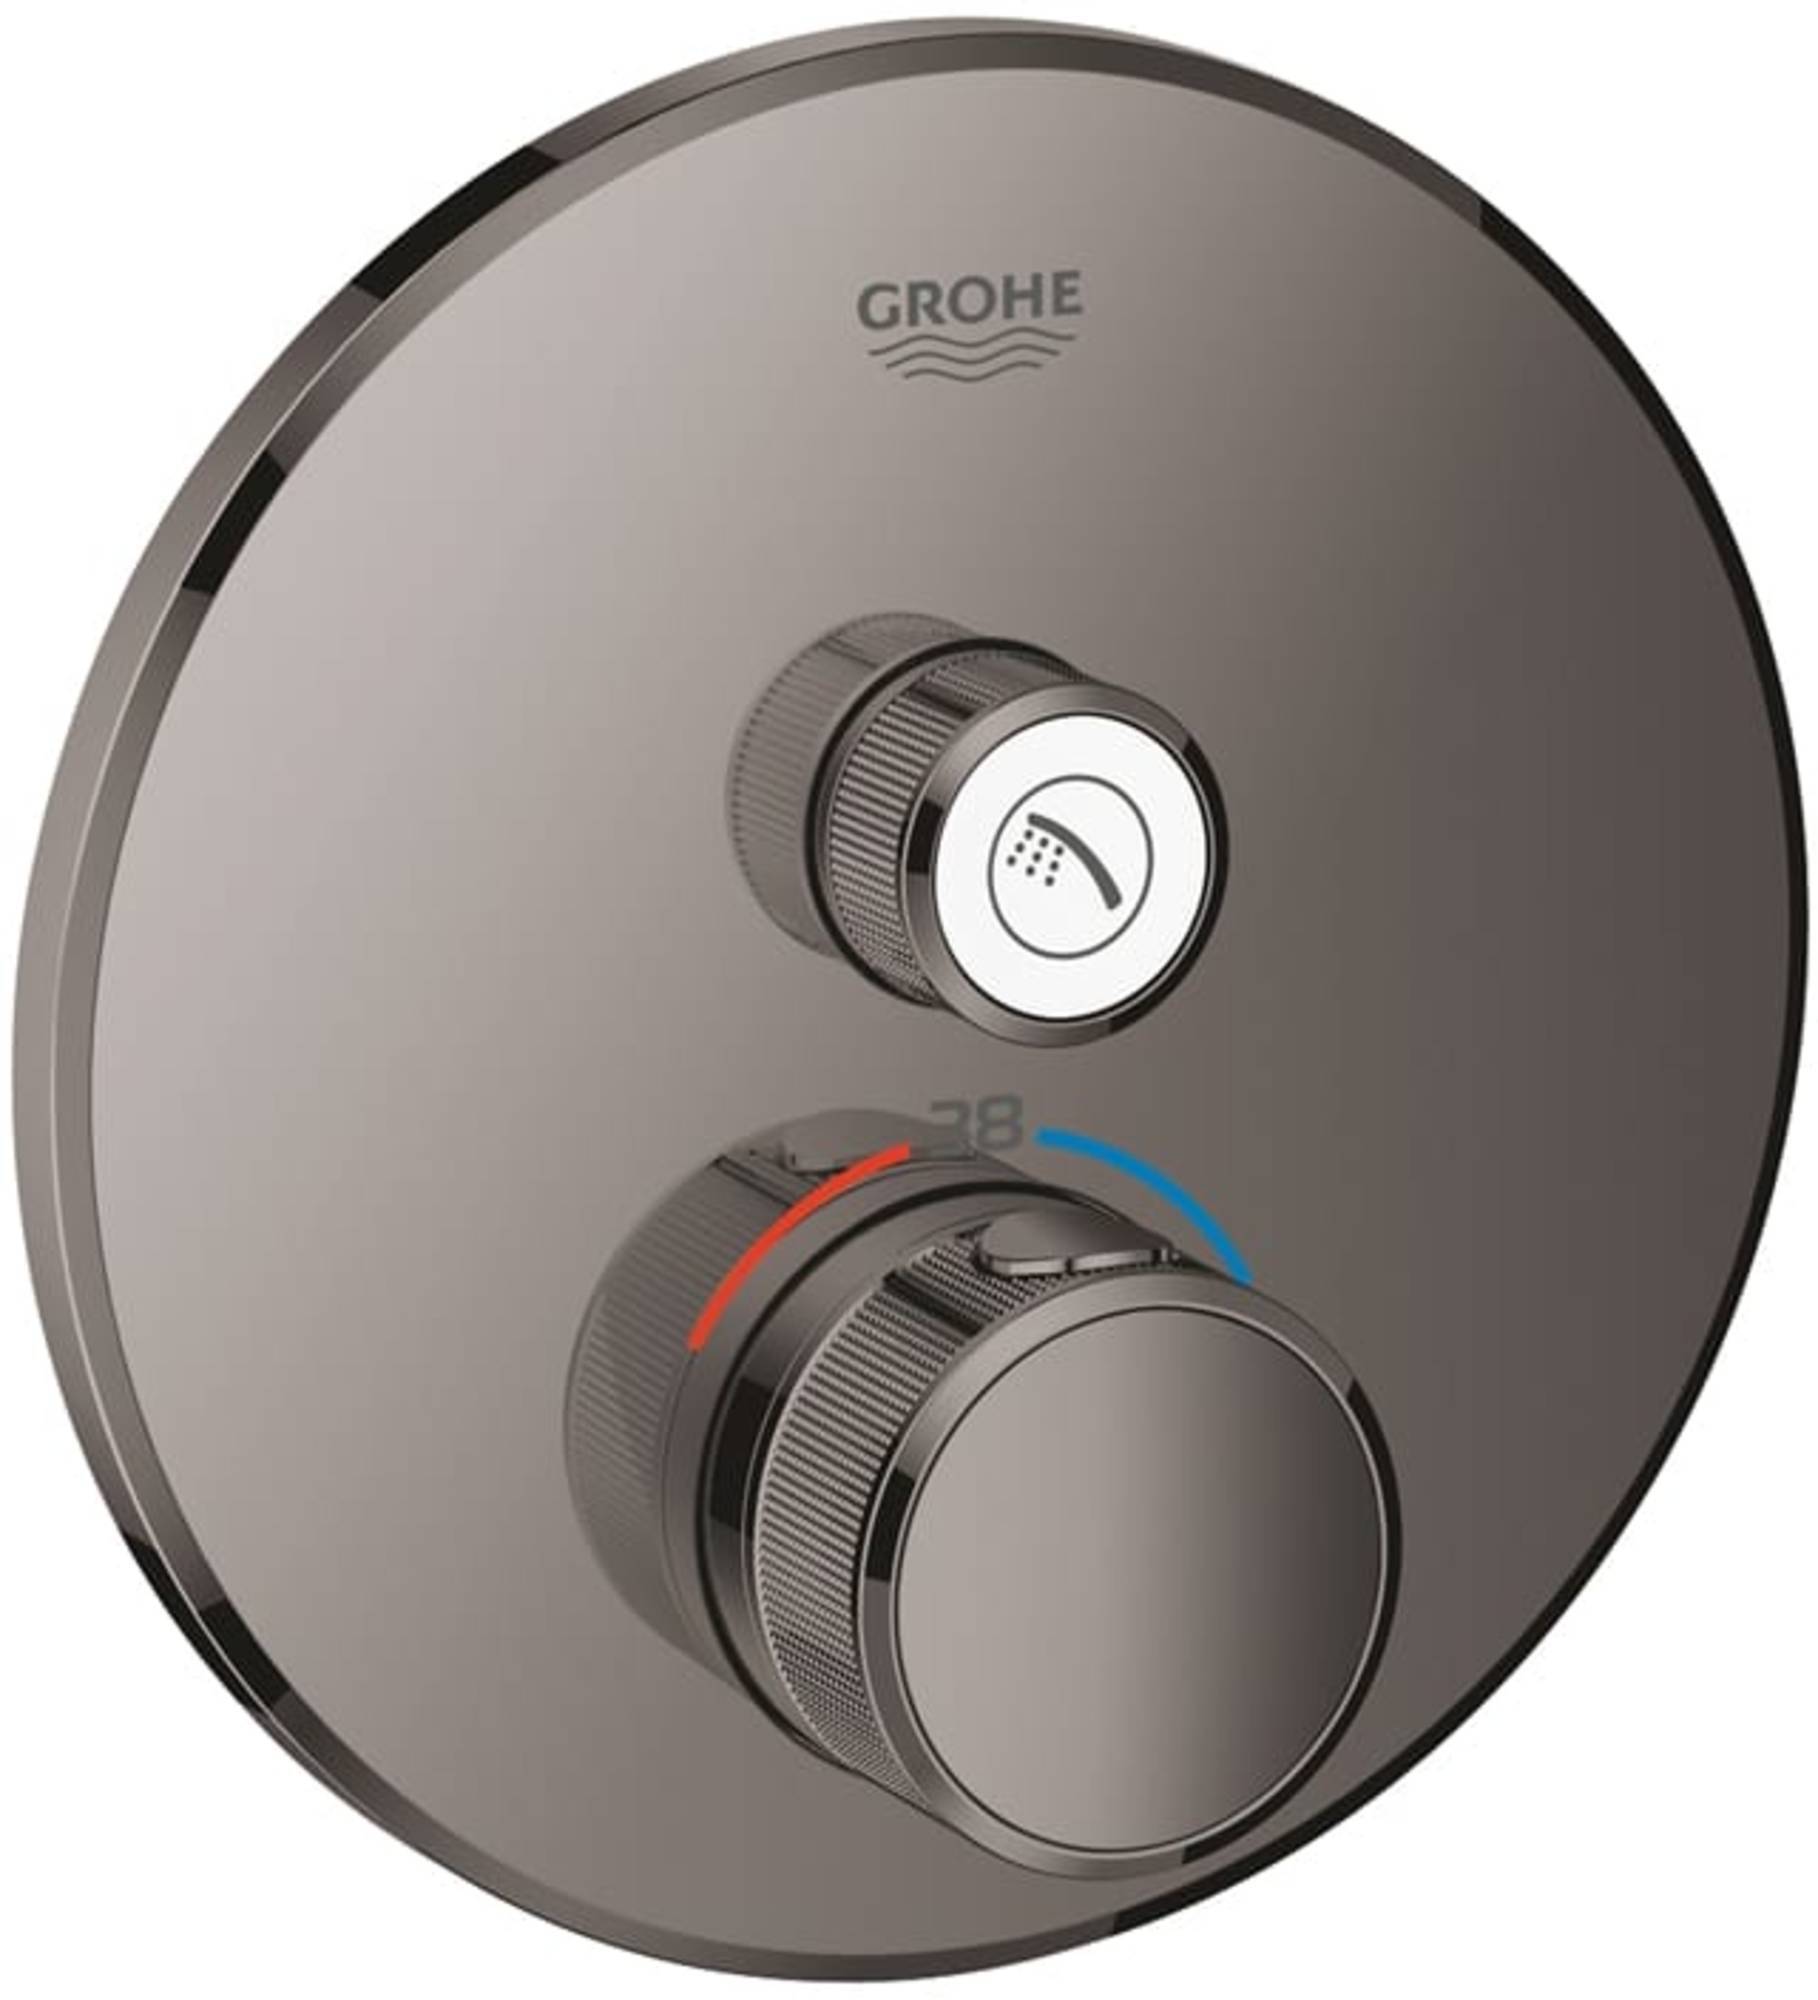 GROHE Grohtherm Smartcontrol Douche Opbouwdeel Rond 15,8x4,3 cm Hard Graphite